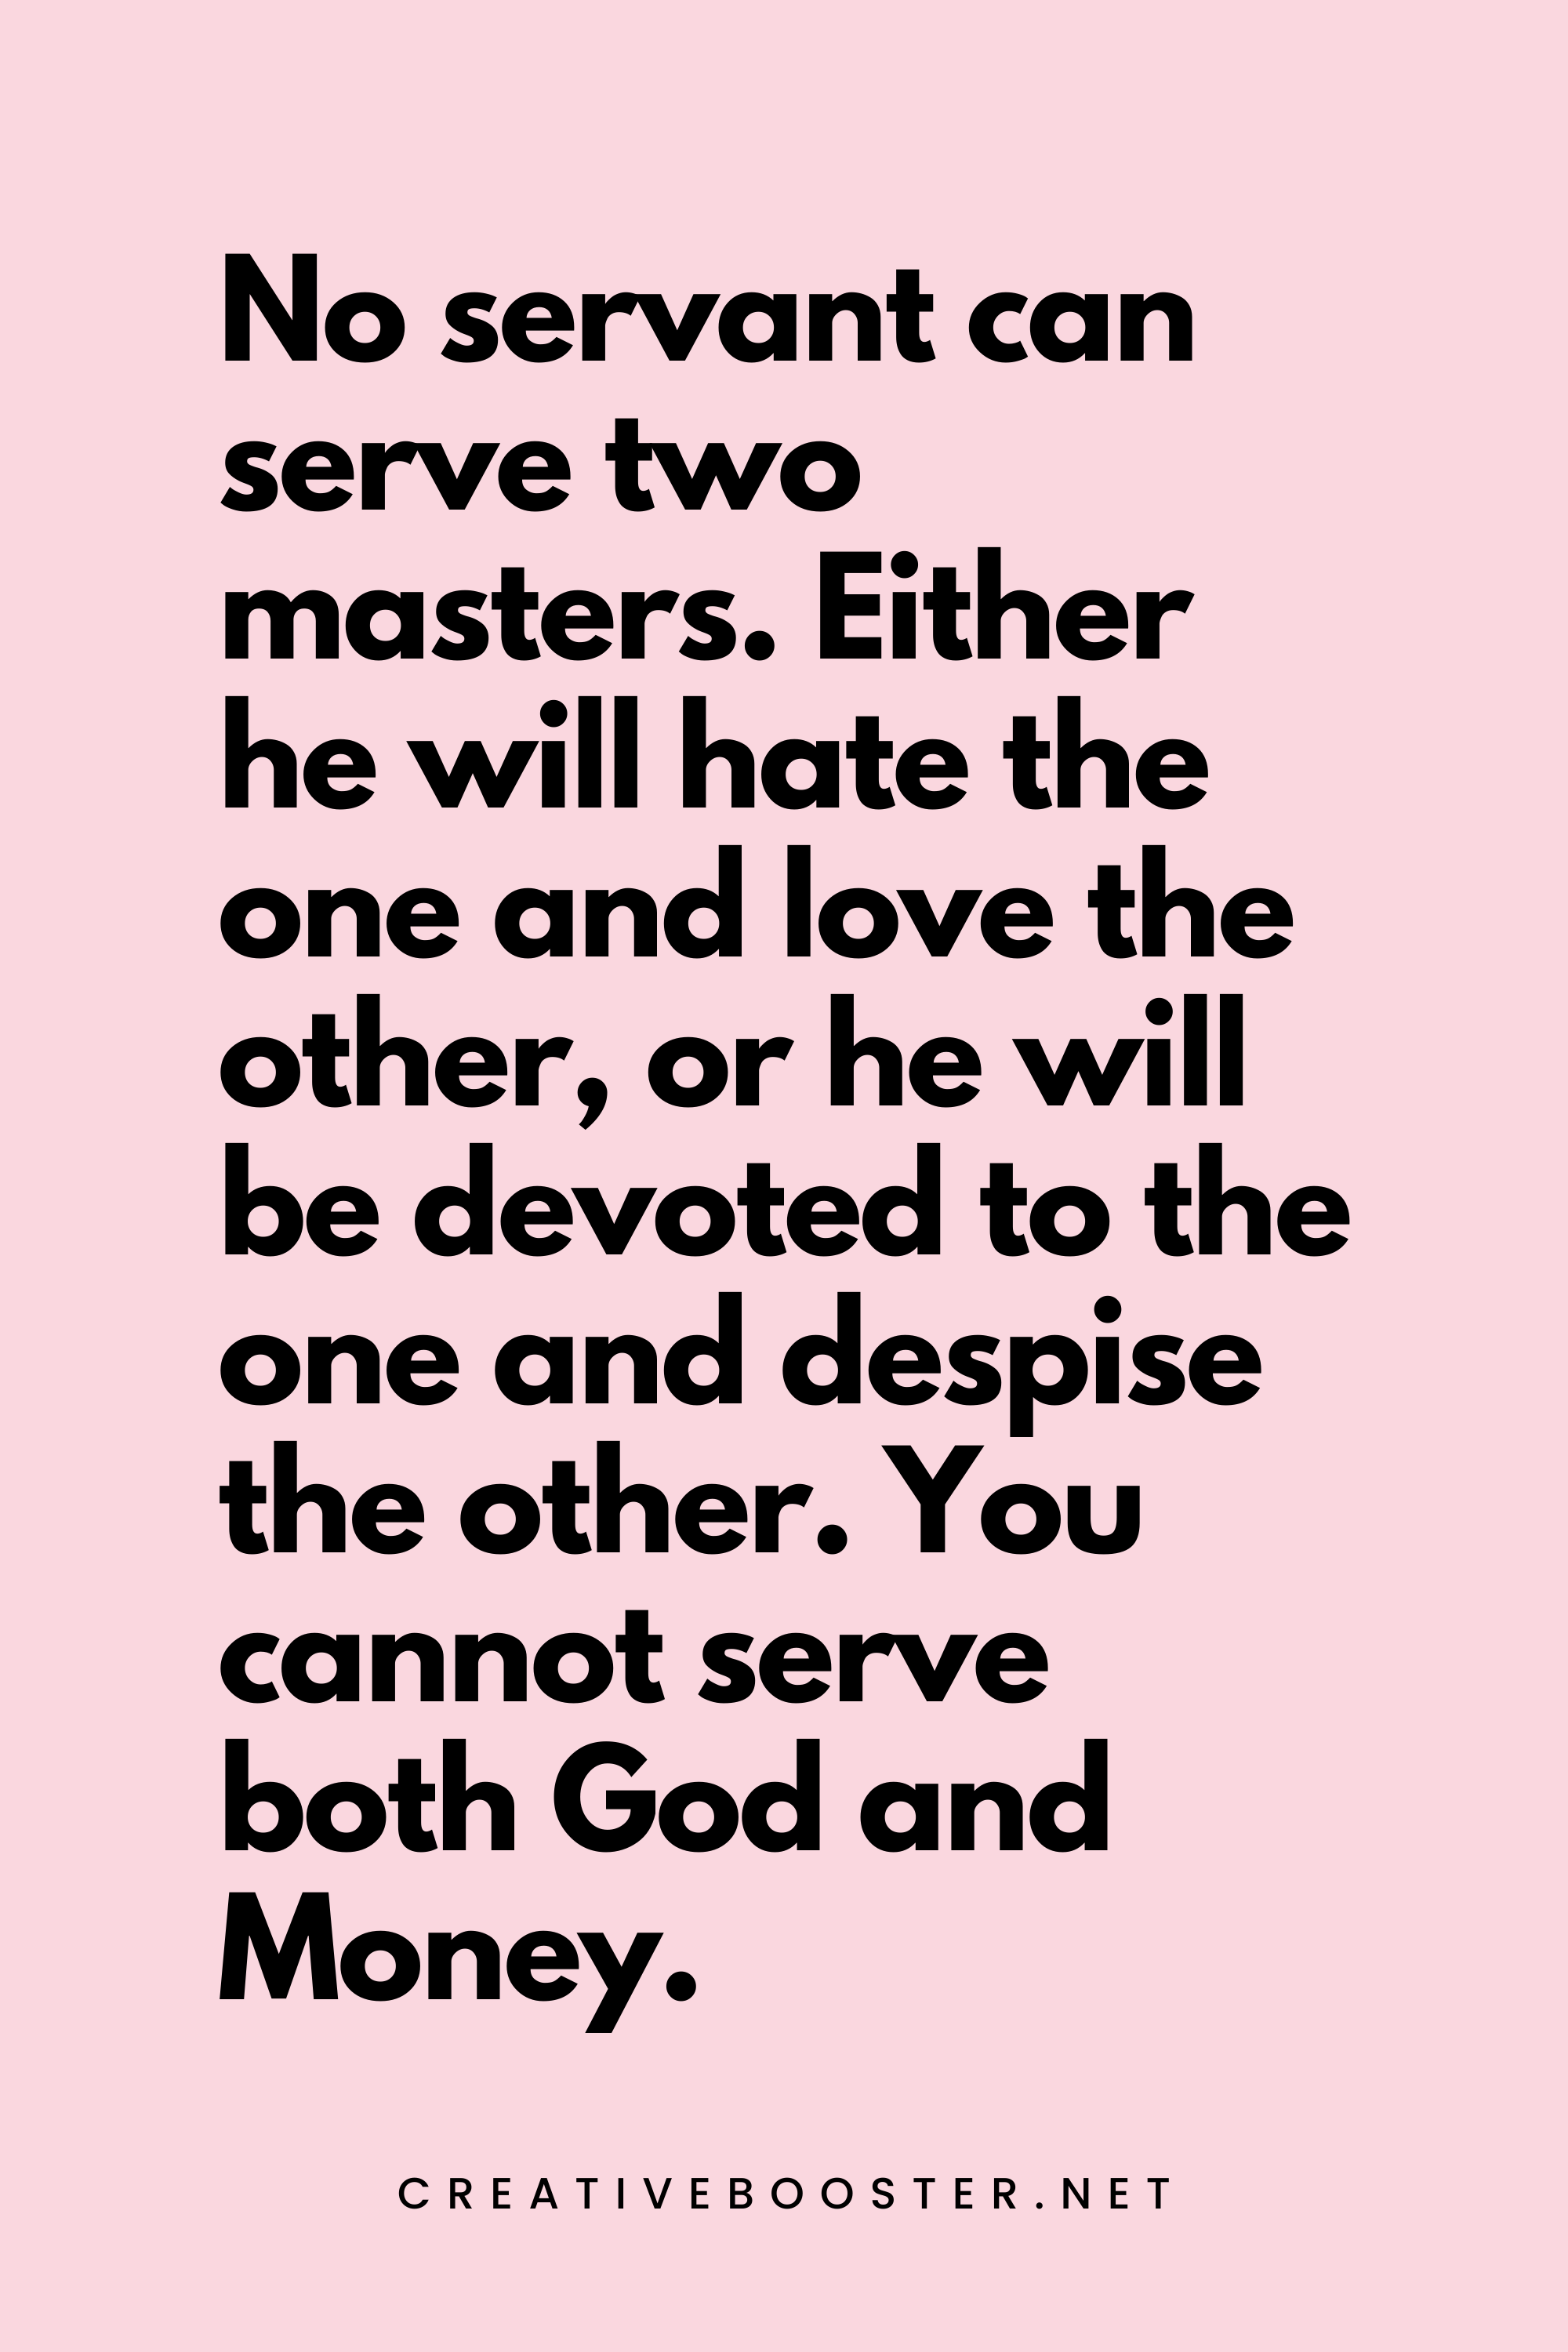 54. No servant can serve two masters. Either he will hate the one and love the other, or he will be devoted to the one and despise the other. You cannot serve both God and Money. - Luke 16:13 - 5.